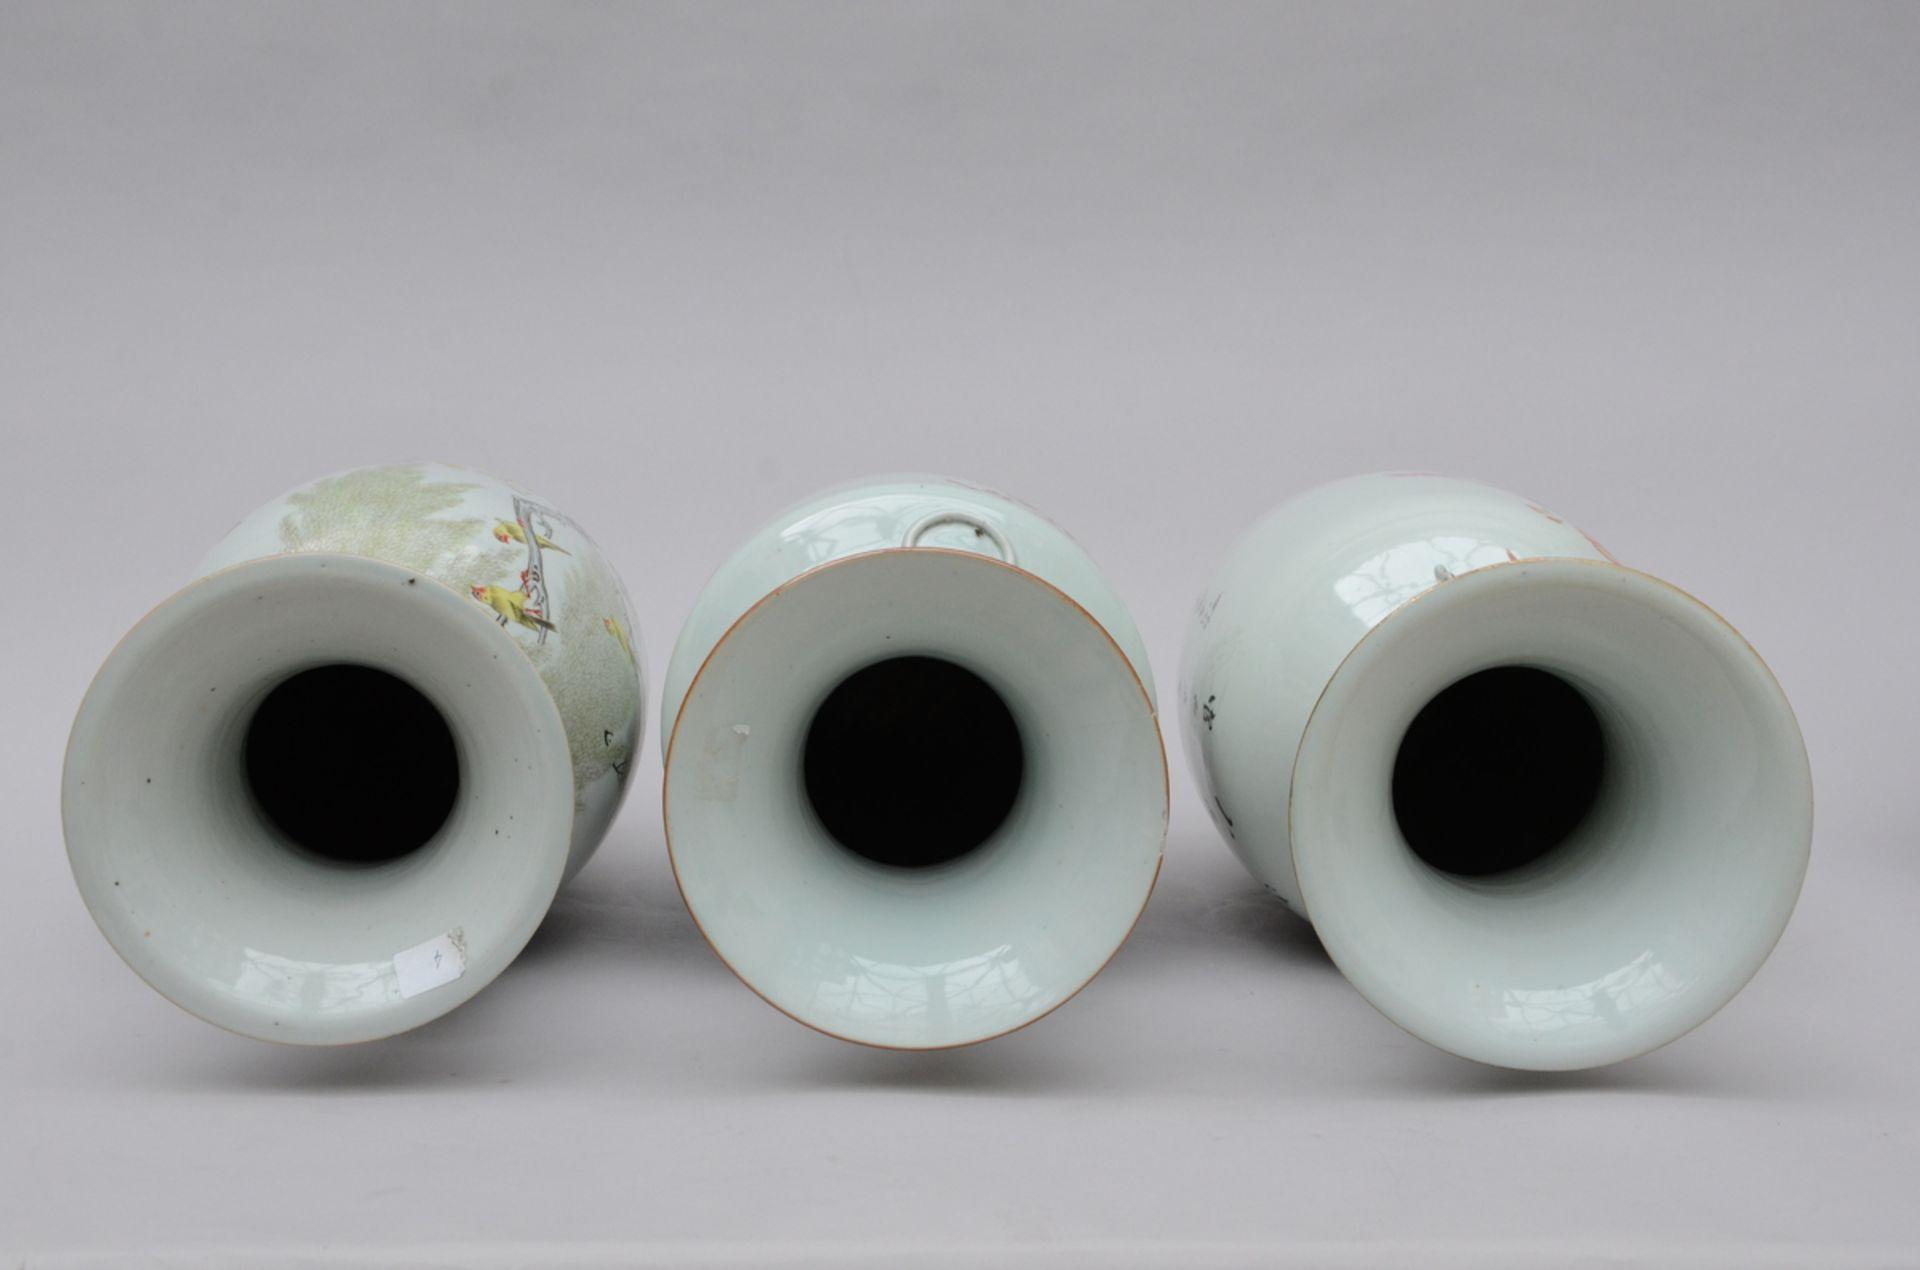 Lot: 3 Chinese vases 'antiquities', 'birds', 'flowers' (H 57.5, 58, 57 cm) - Image 3 of 4